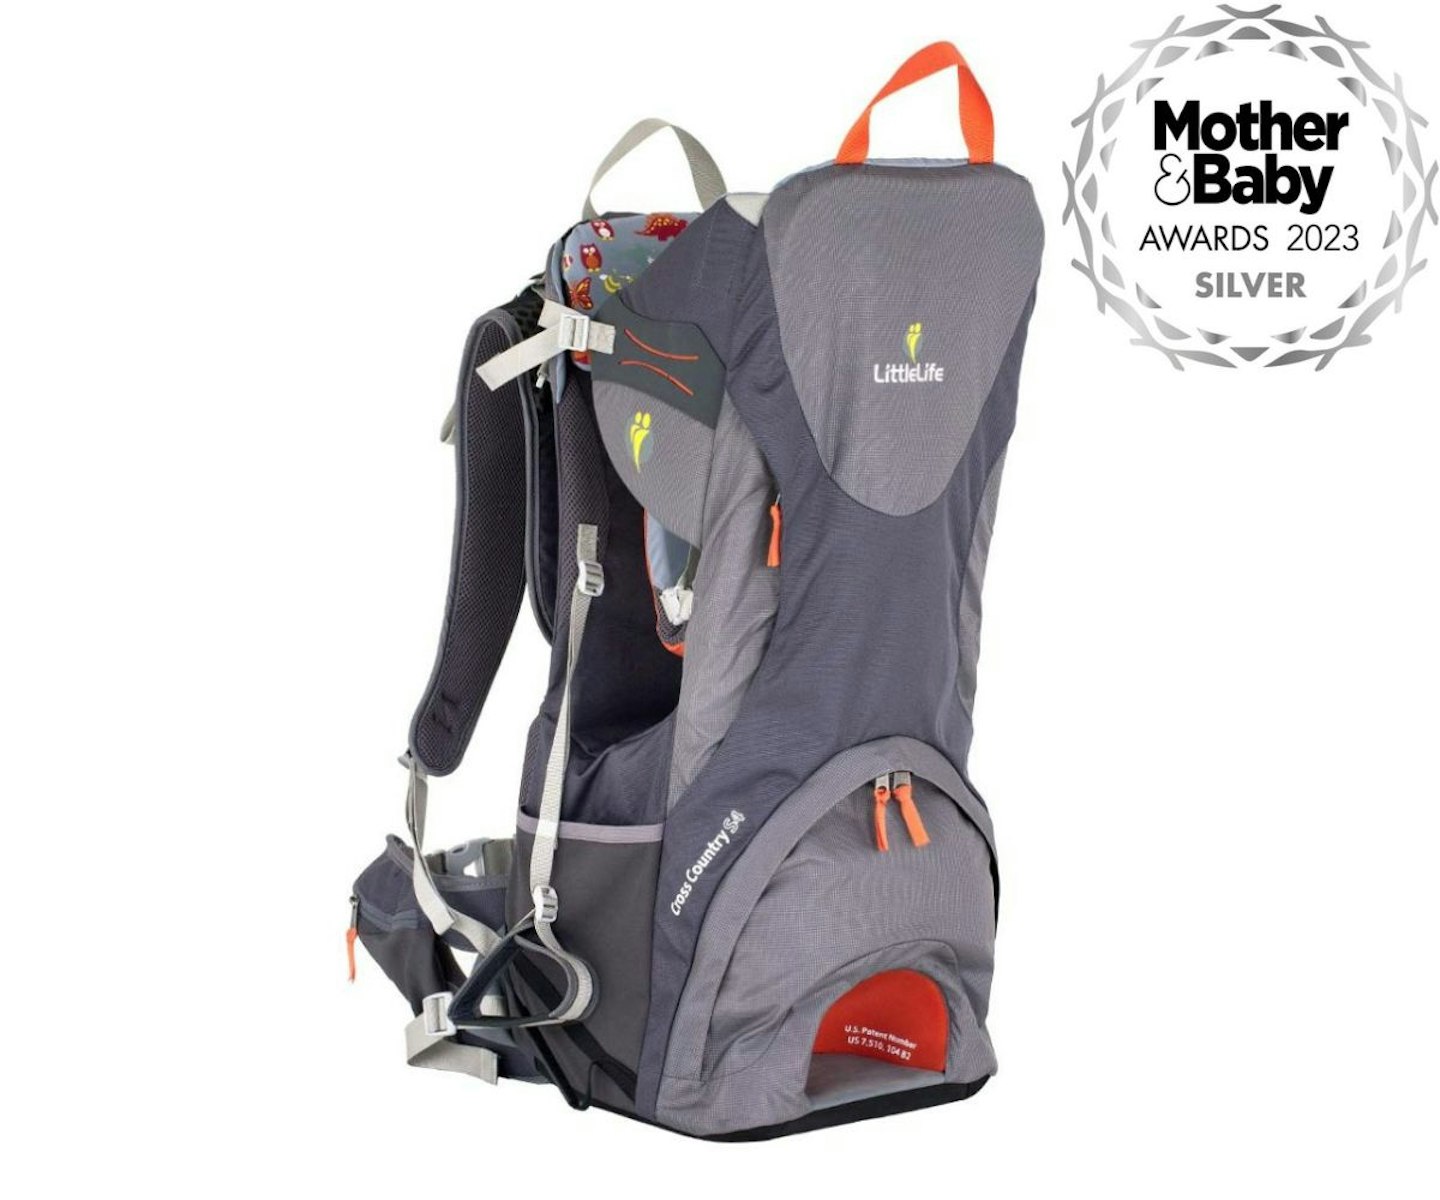 The best baby carrier backpacks: Cross Country S4 Child Carrier